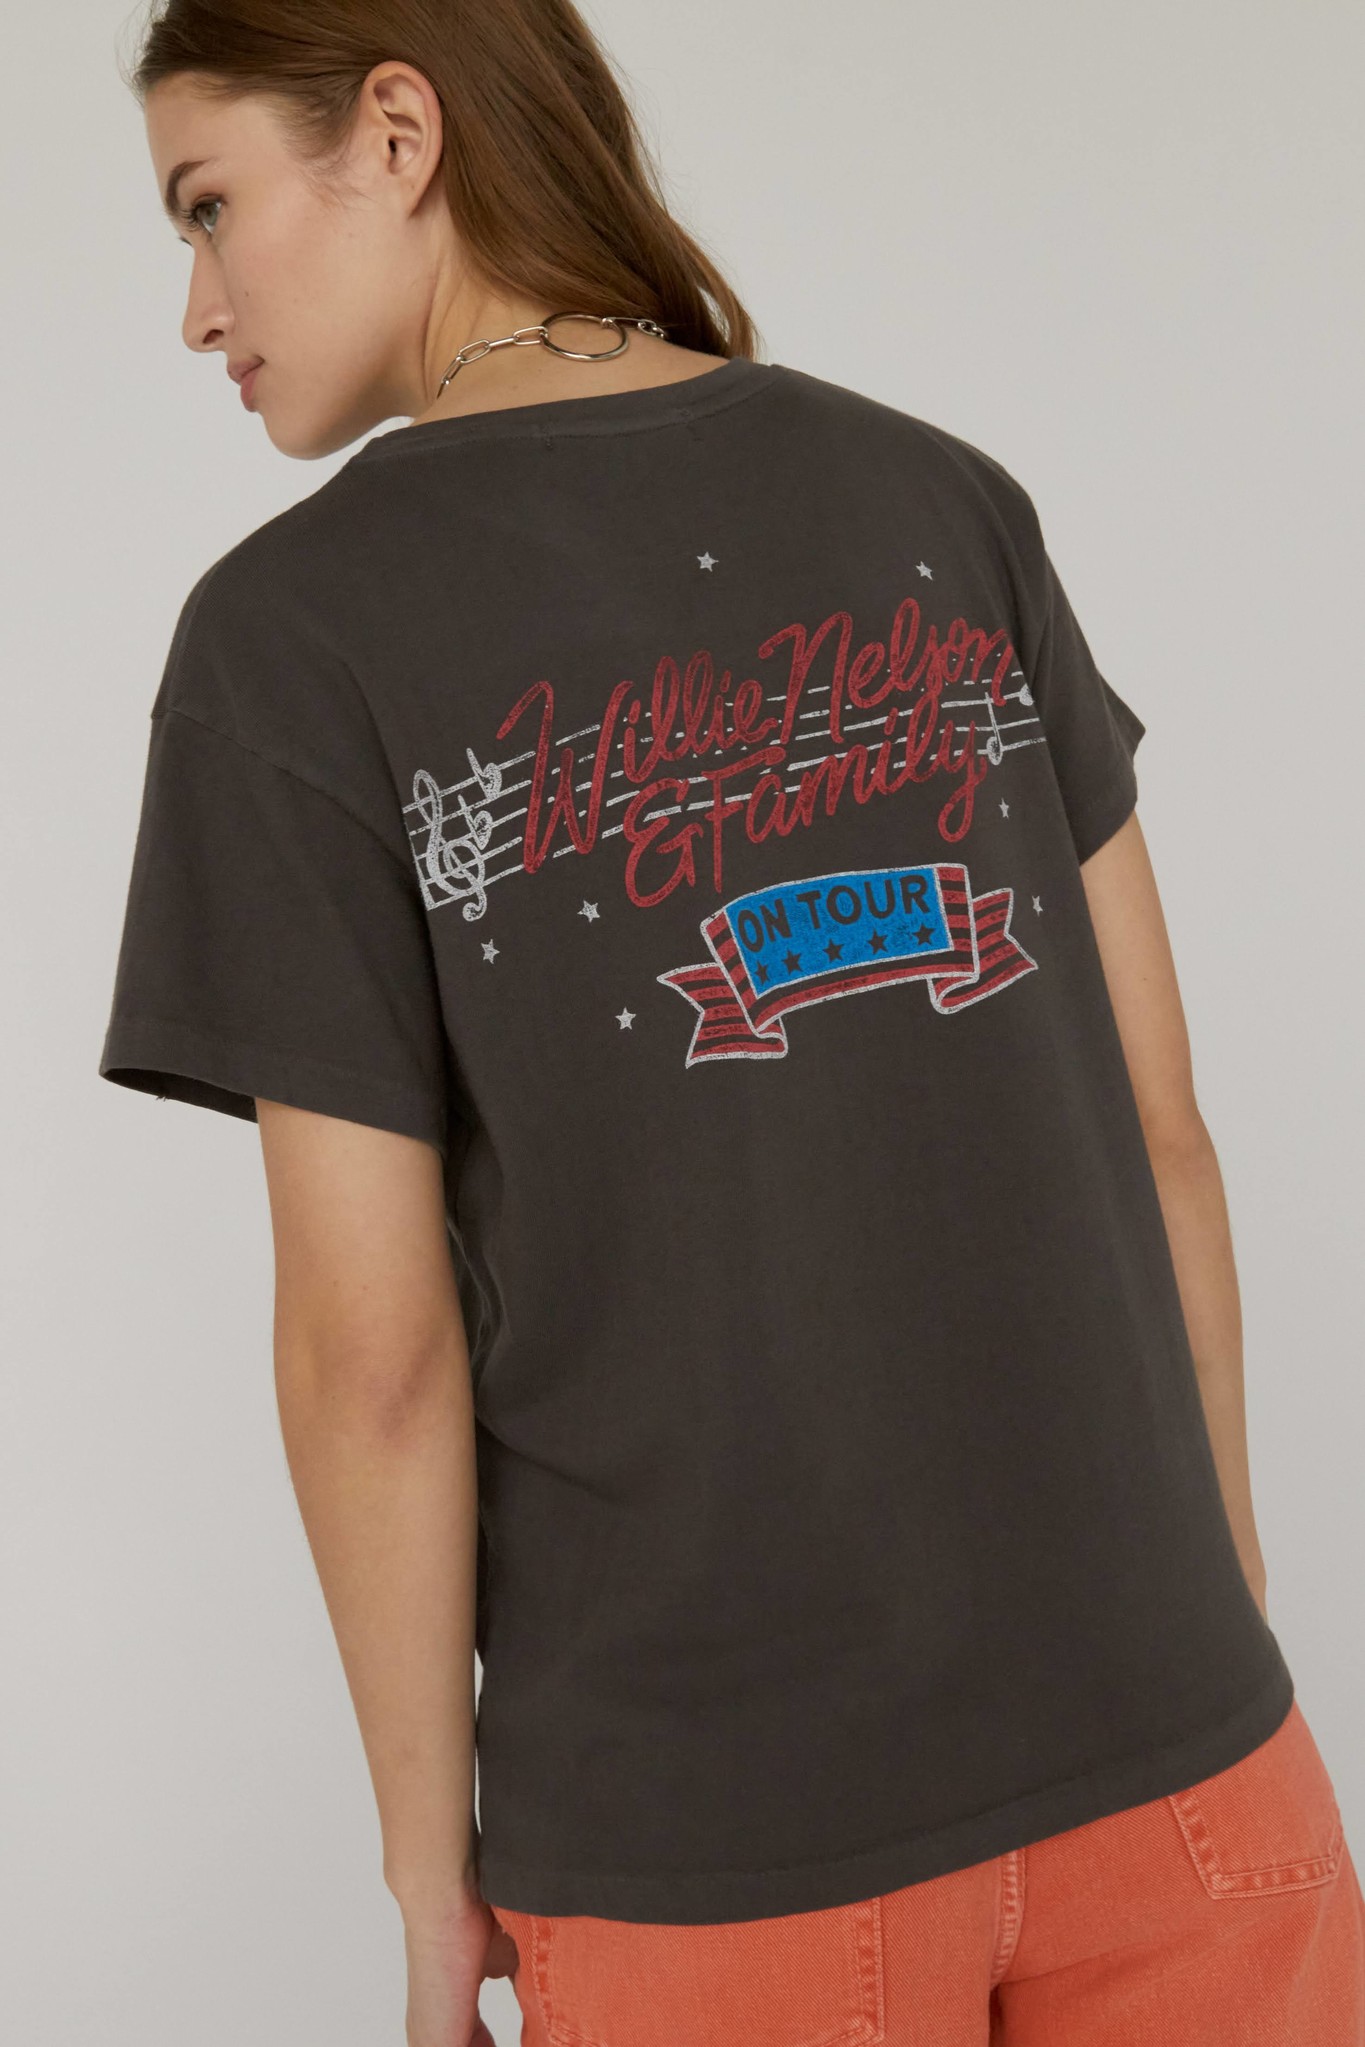 Day Dreamer Willie Nelson and Family Tour Tee